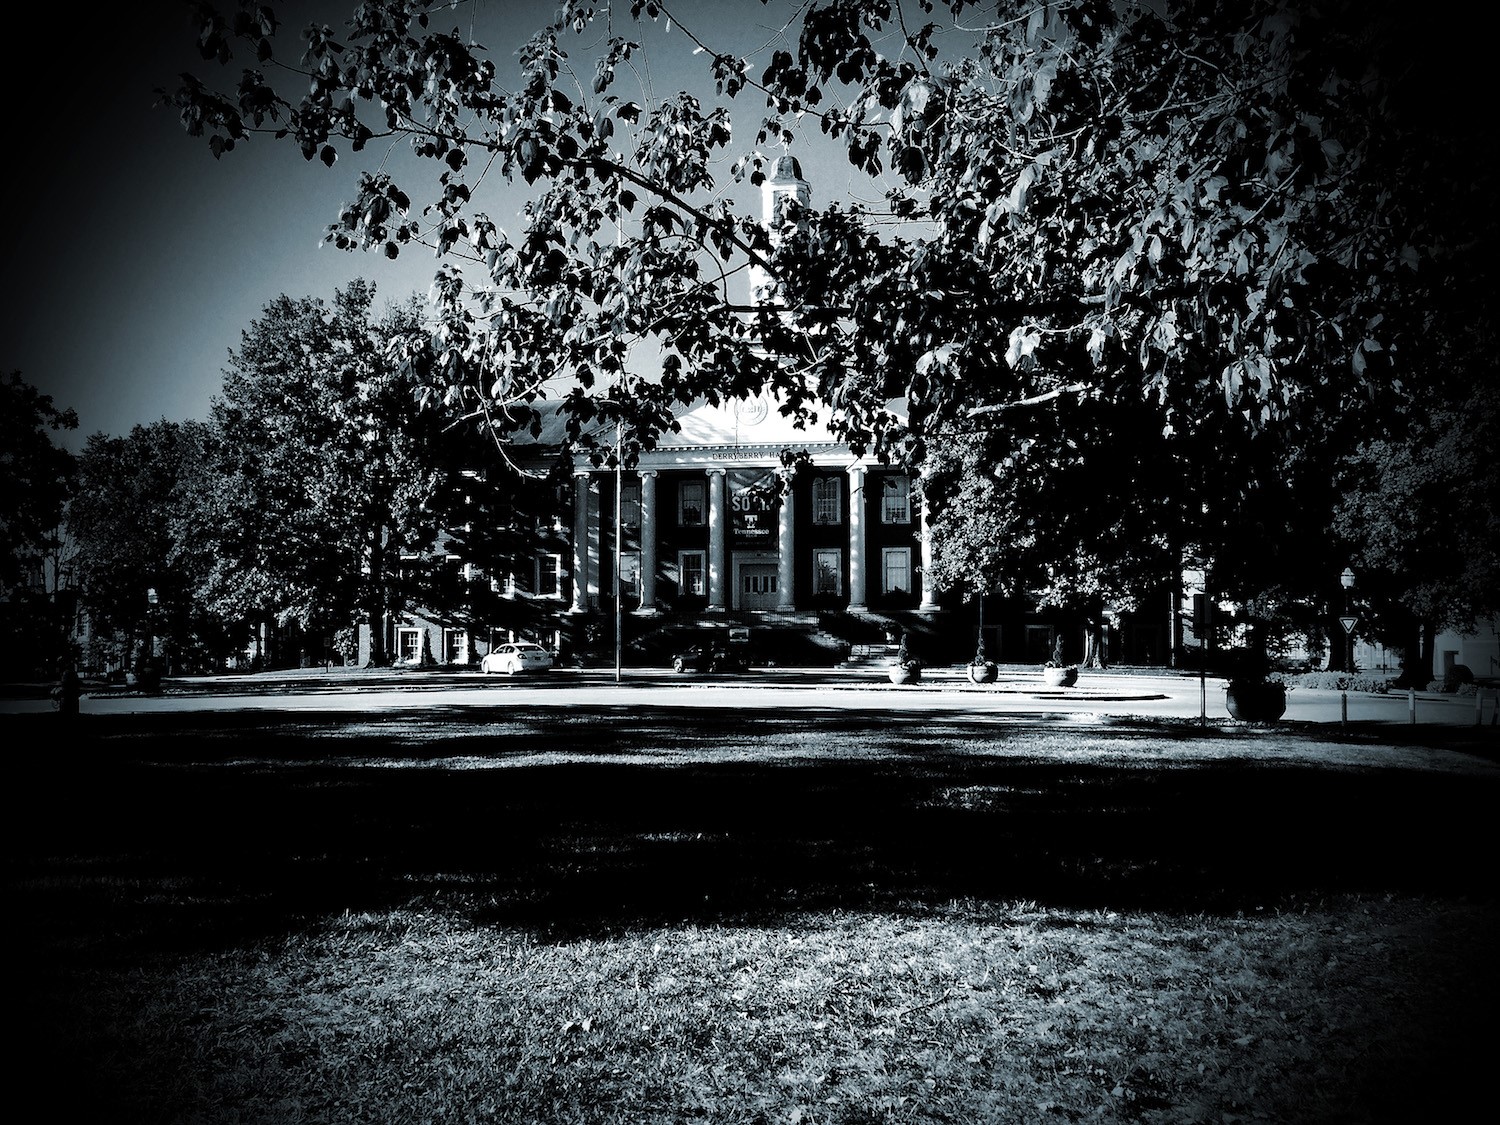 Black and white photo of Derryberry Hall with an effect to look "spooky"